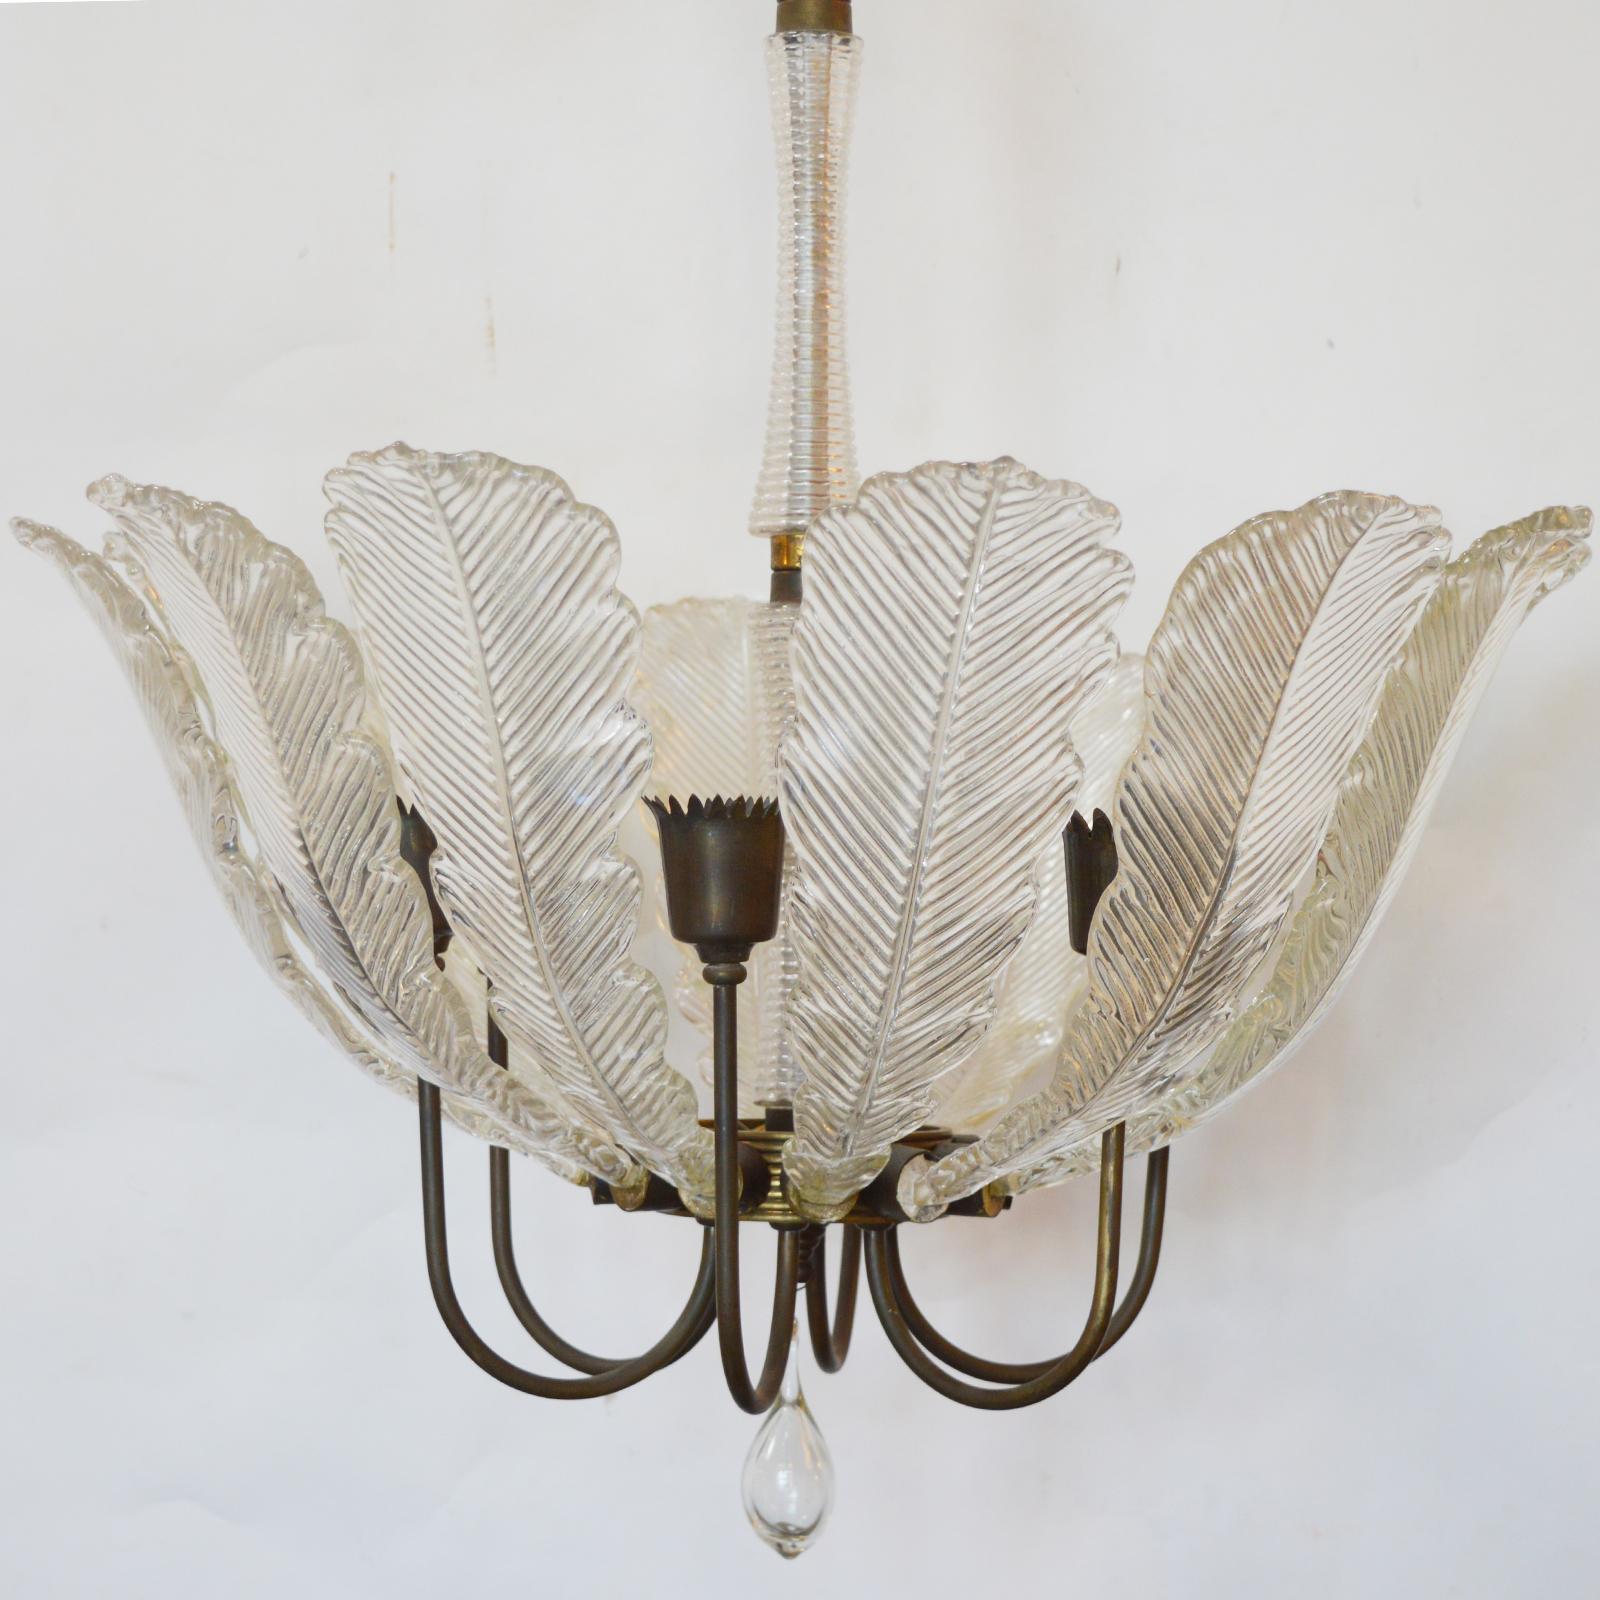 Vintage glass leaves chandelier by Barovier e Toso, 1960.